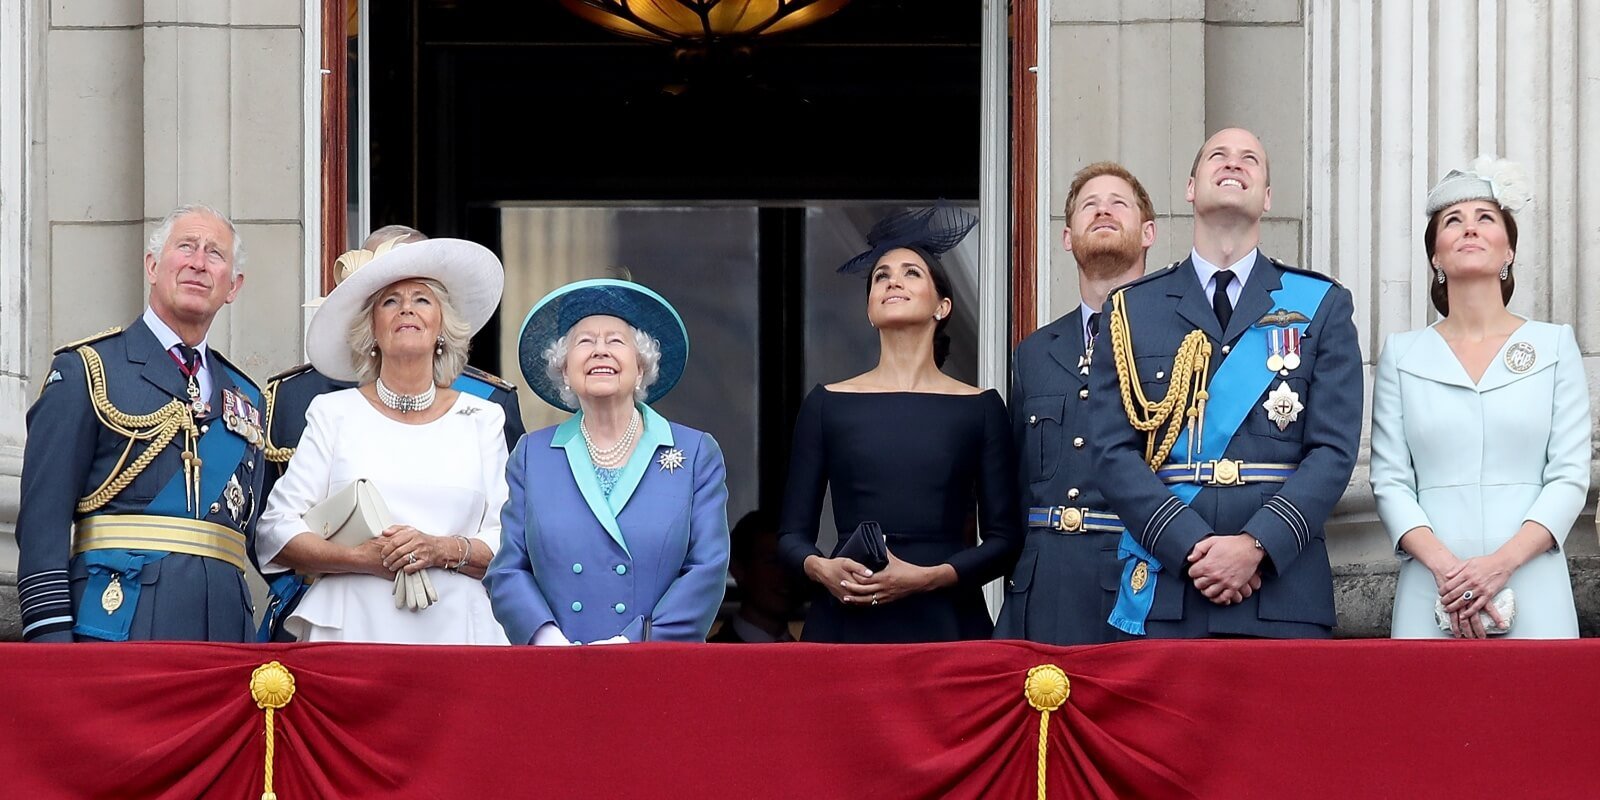 Prince Charles, Camilla Parker Bowles, Queen Elizabeth, Meghan Markle, Prince Harry, Prince William and Kate Middleton on the Buckingham Palace balcony in 2018.